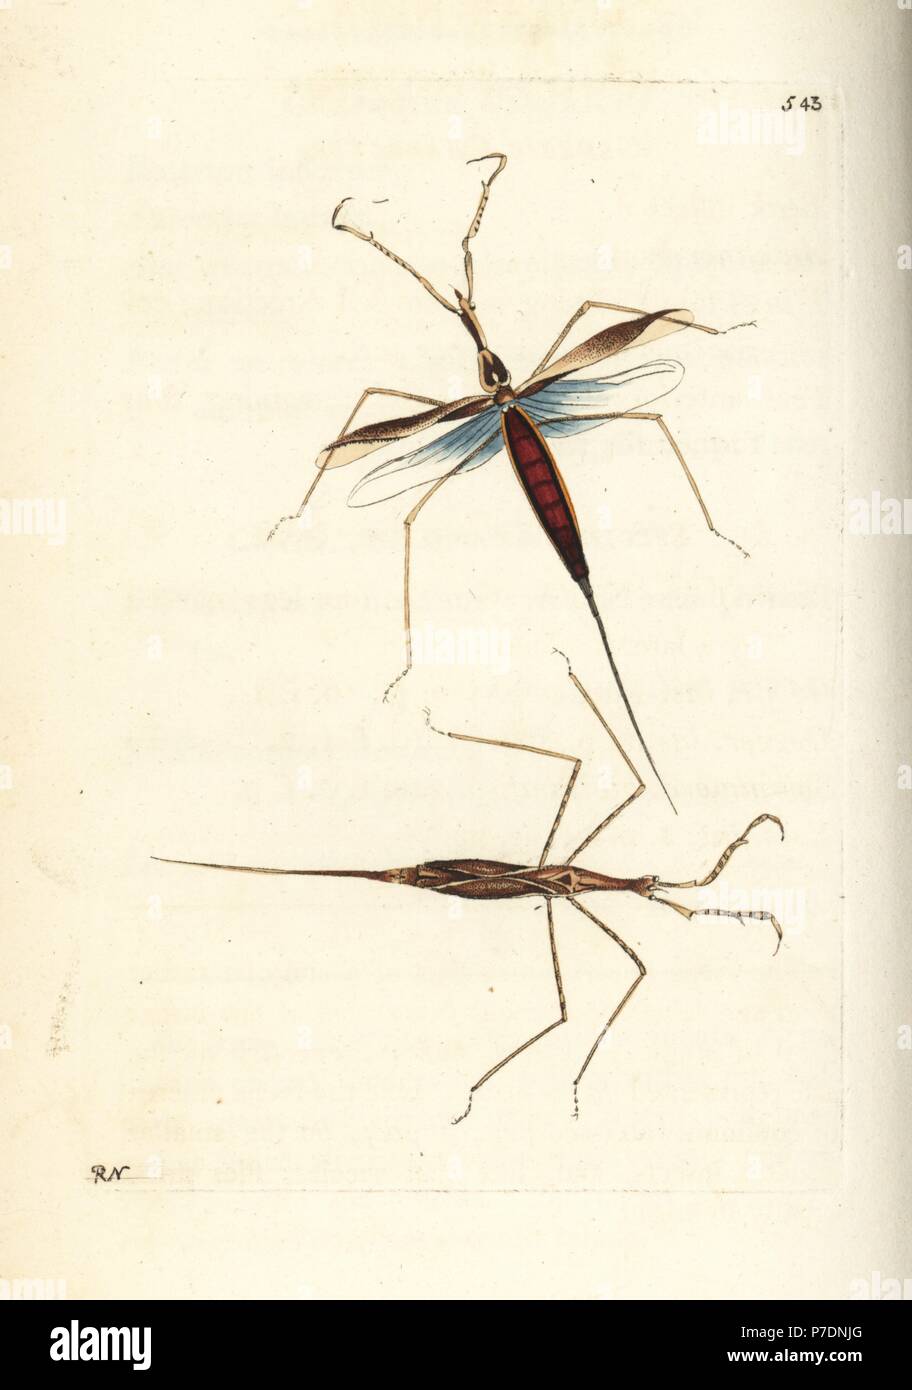 Water stick insect, Ranatra linearis (Linear nepa, Nepa linearis). Illustration drawn and engraved by Richard Polydore Nodder. Handcoloured copperplate engraving from George Shaw and Frederick Nodder's The Naturalist's Miscellany, London, 1802. Stock Photo